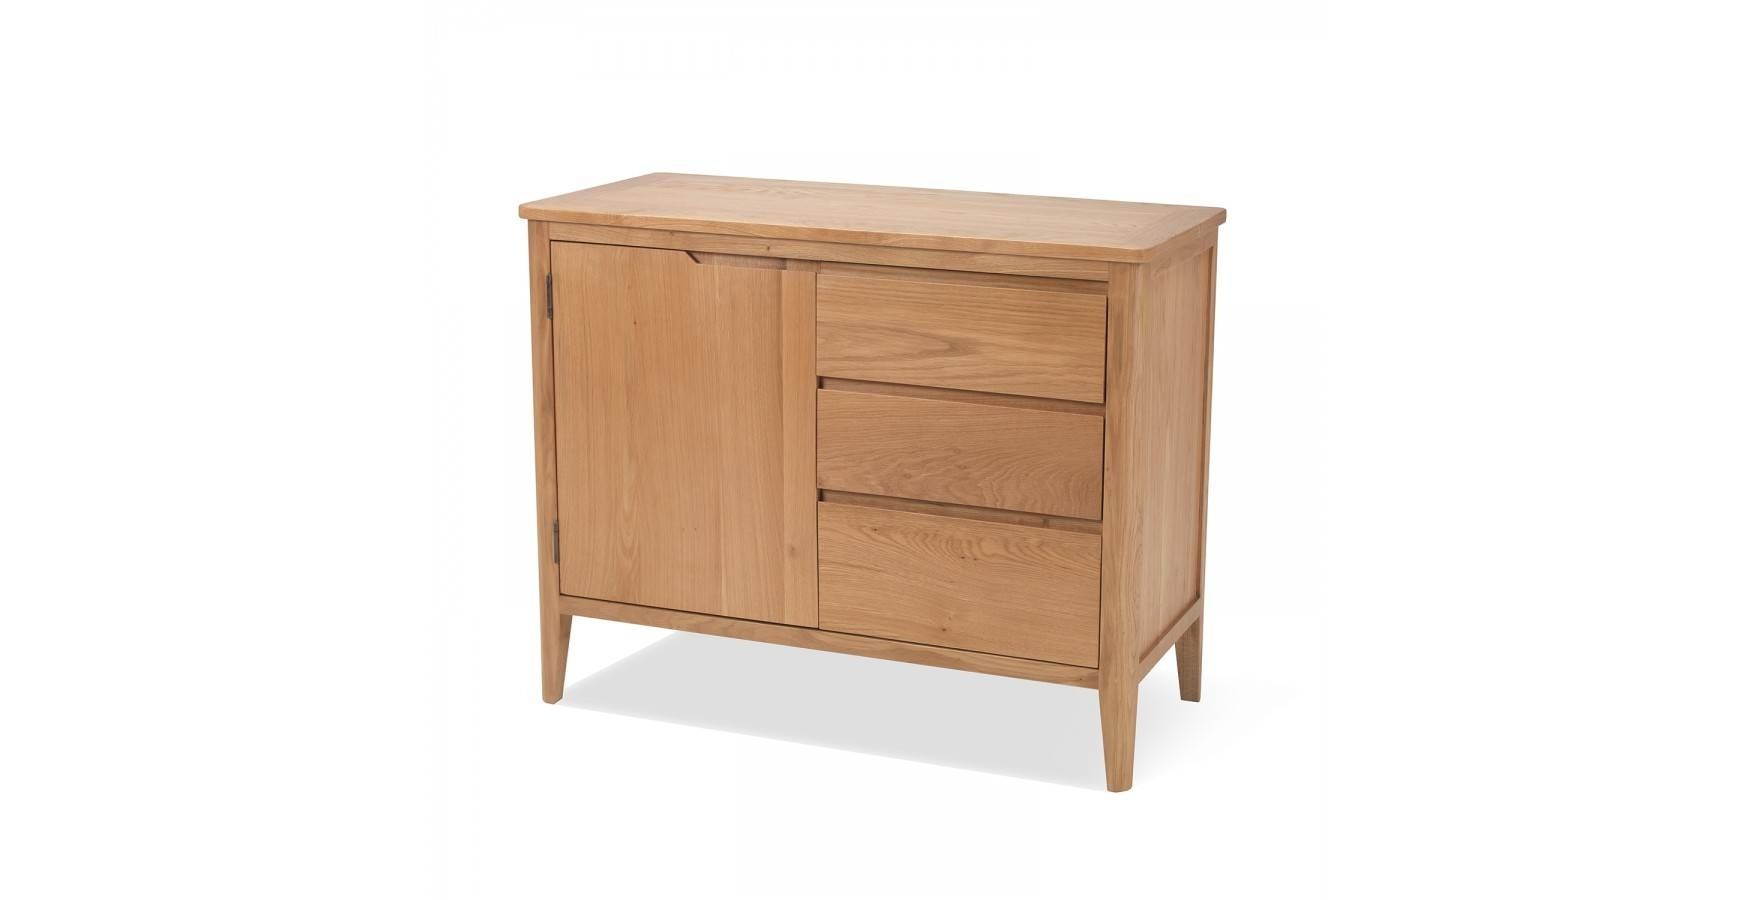 Cadley Oak Small Sideboard With Drawers – Lifestyle Furniture Uk Within Sideboard Small (View 2 of 20)